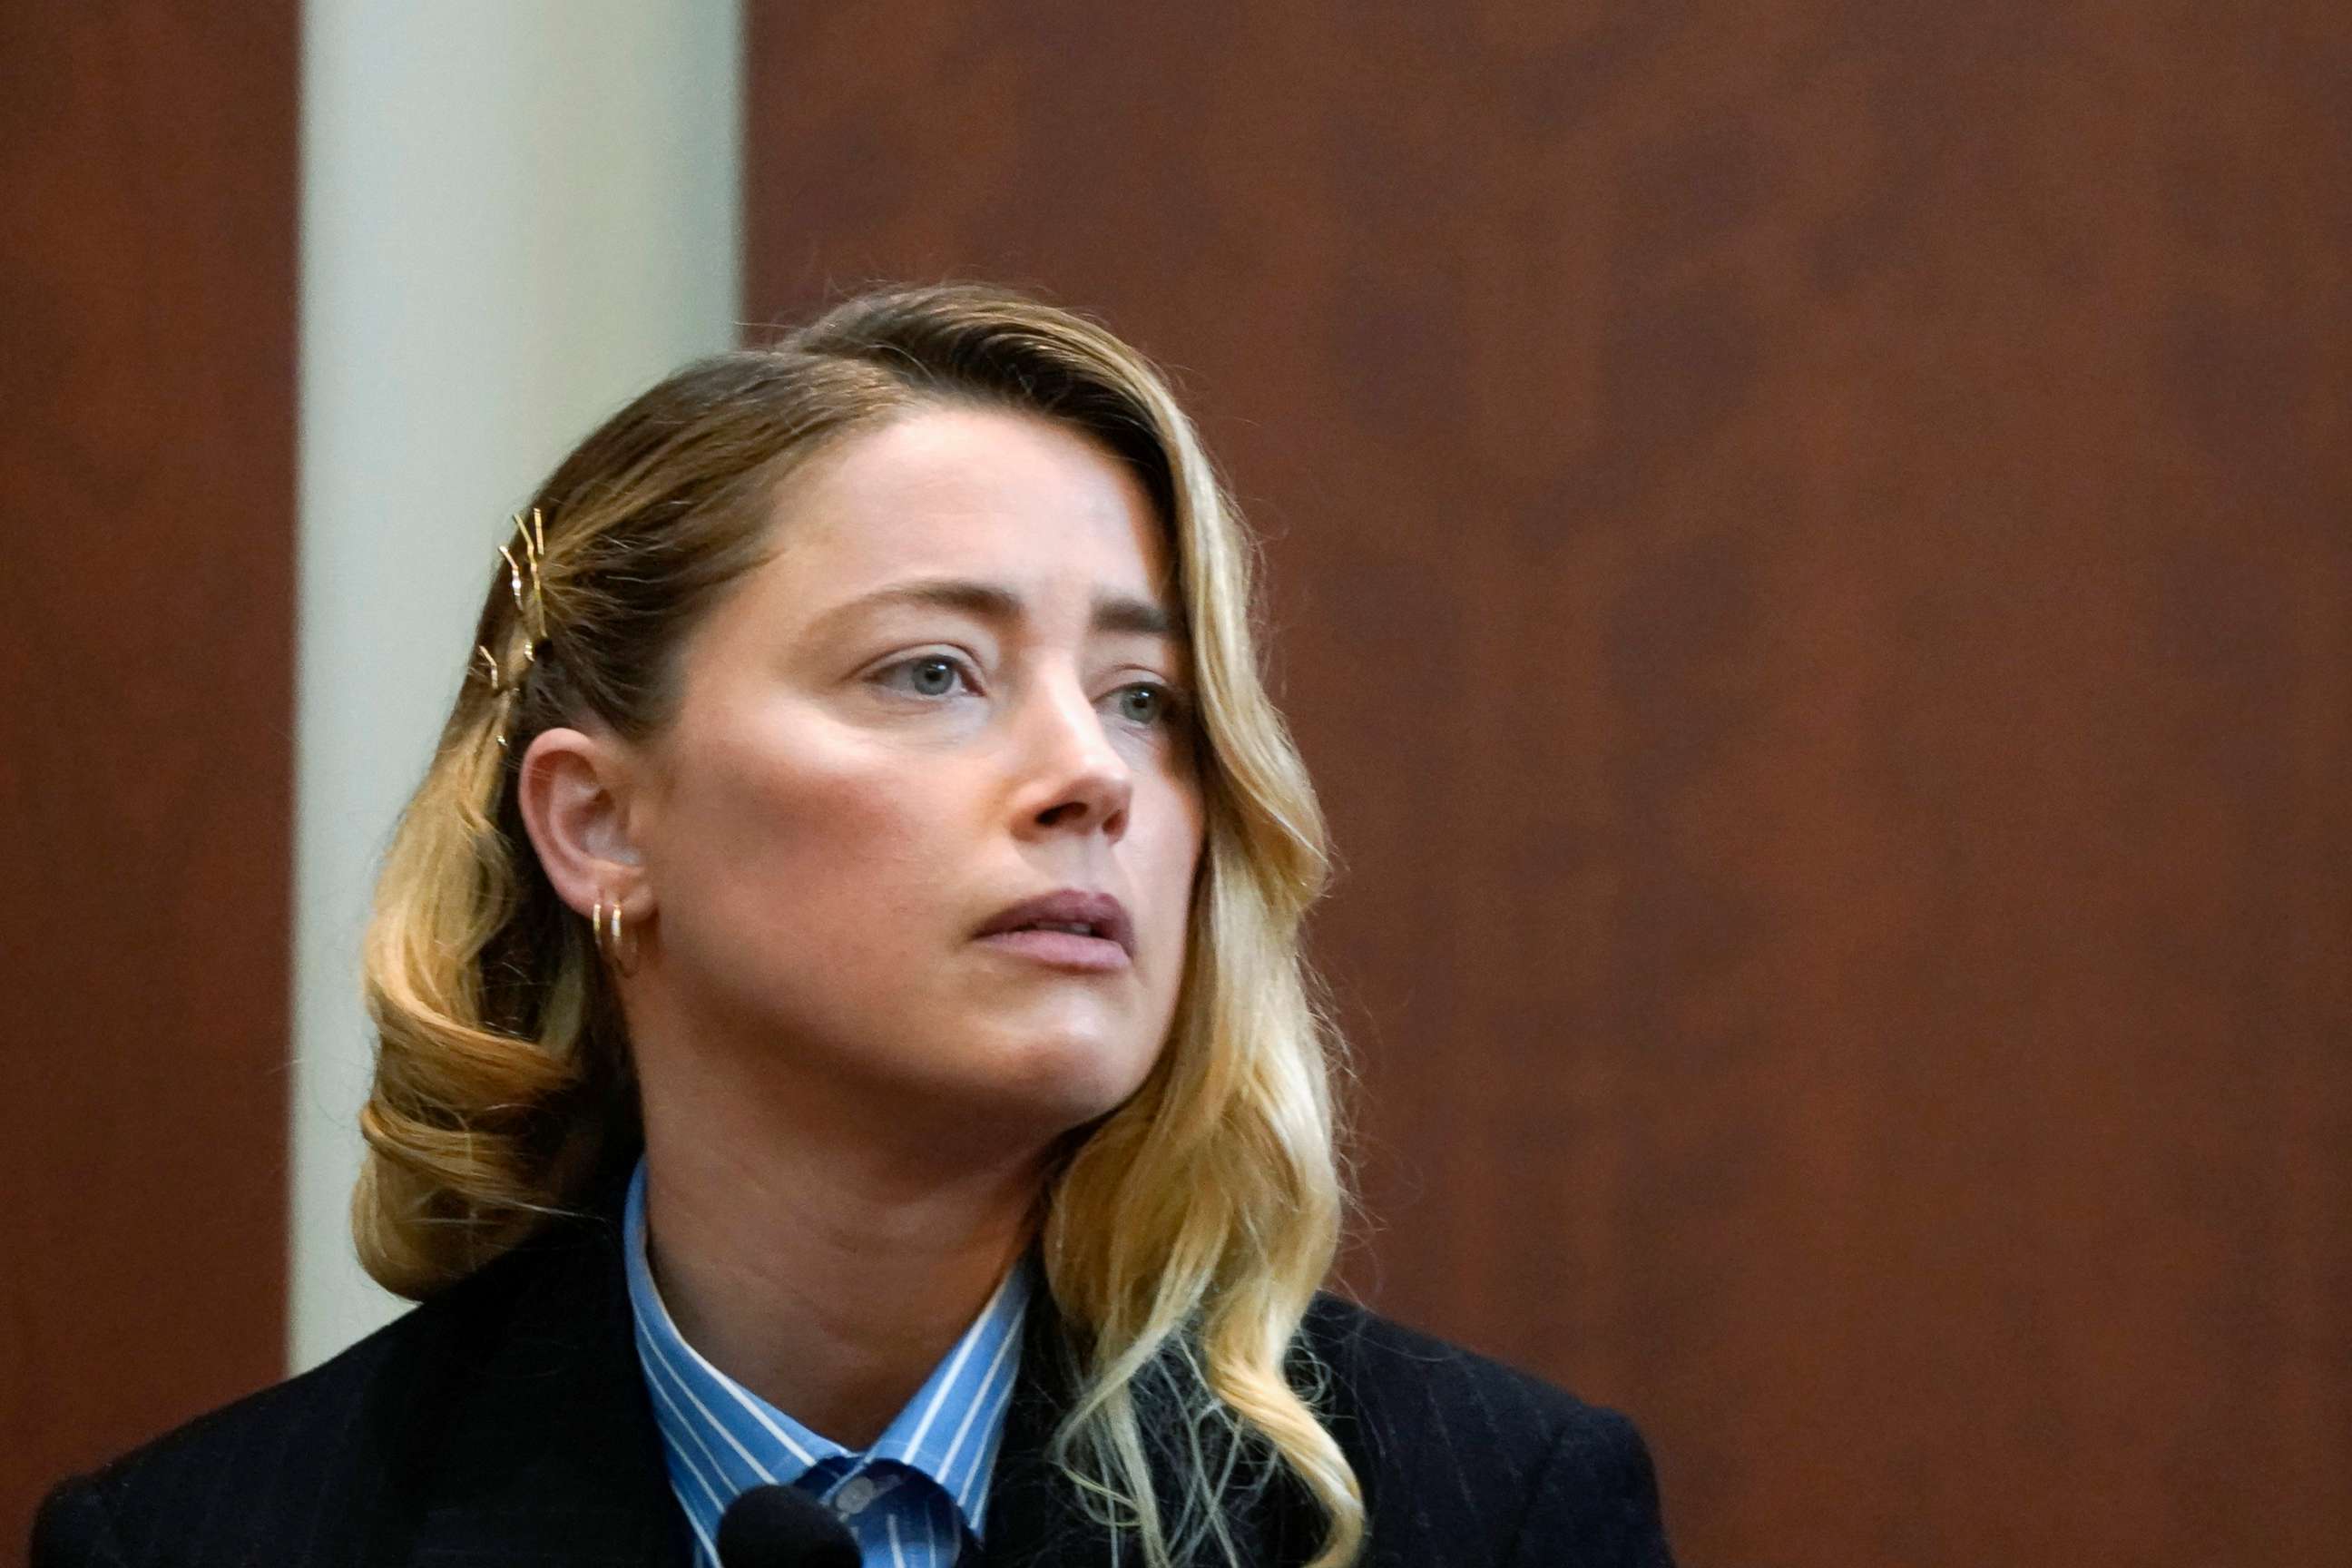 PHOTO: Amber Heard testifies in the courtroom at the Fairfax County Circuit Court in Fairfax, Va., May 4, 2022.